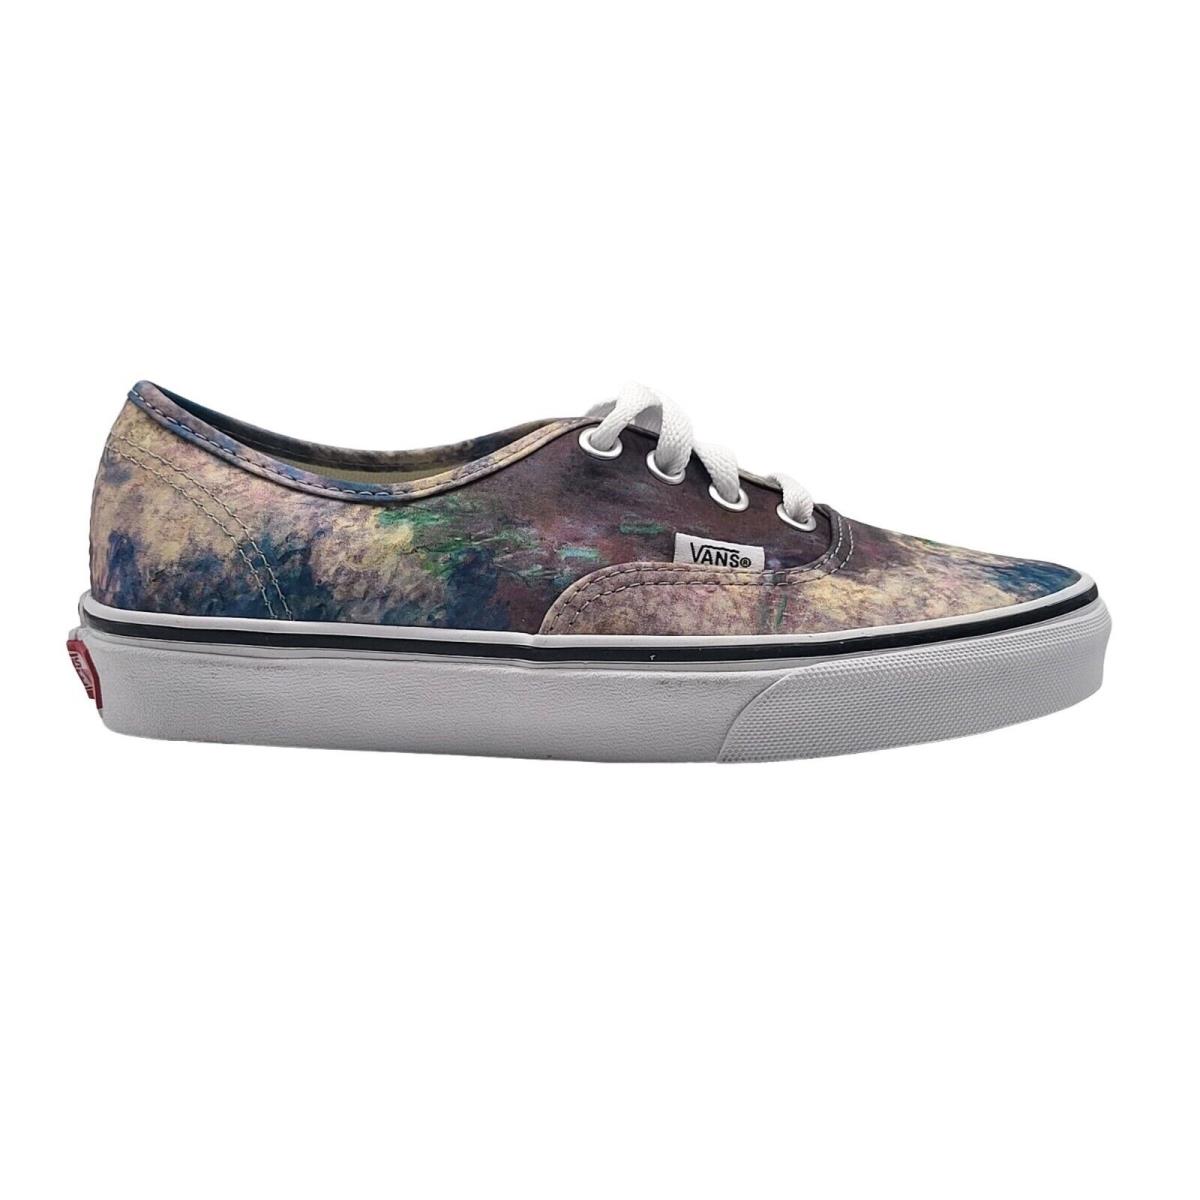 Vans Authentic Womens Moma Claude Monets Water Lilies Shoes Size 5.5